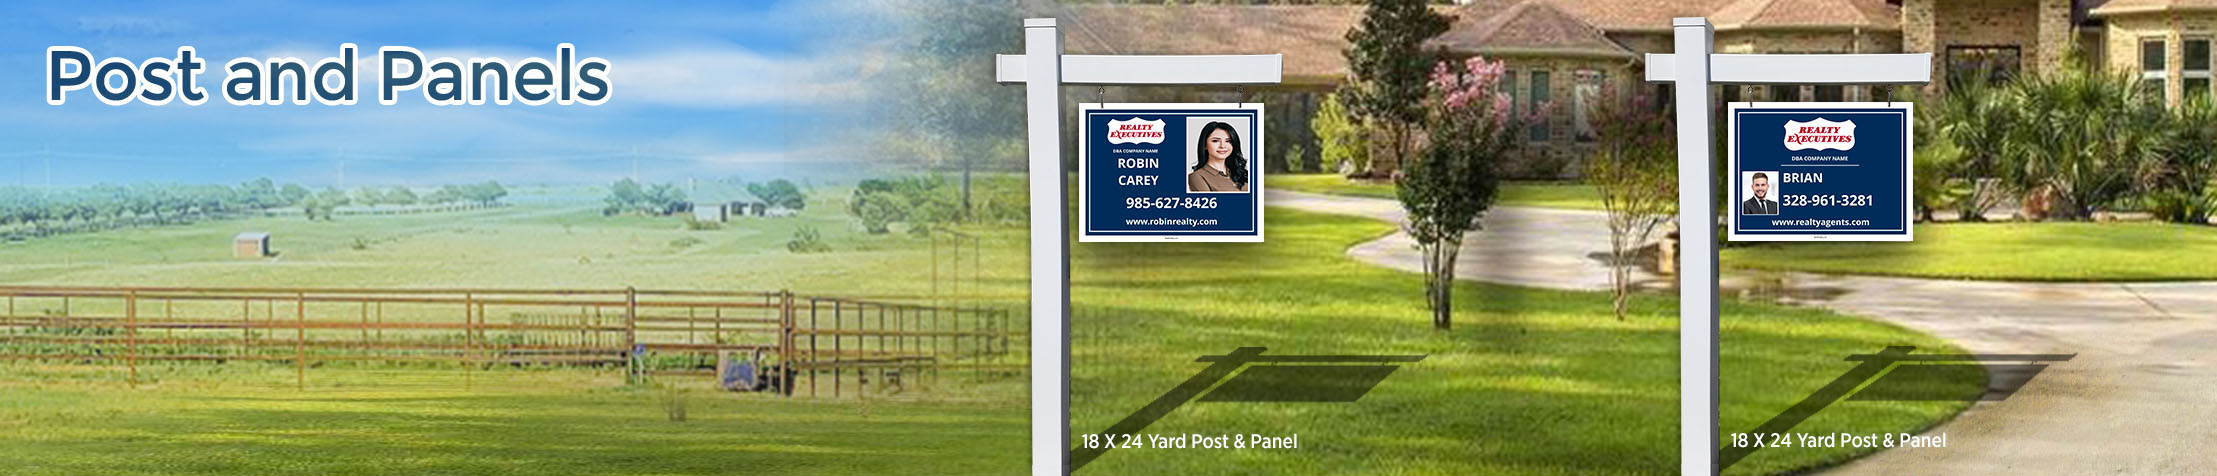 Realty Executives Real Estate Post and Panel - Realty Executives real estate signs | BestPrintBuy.com